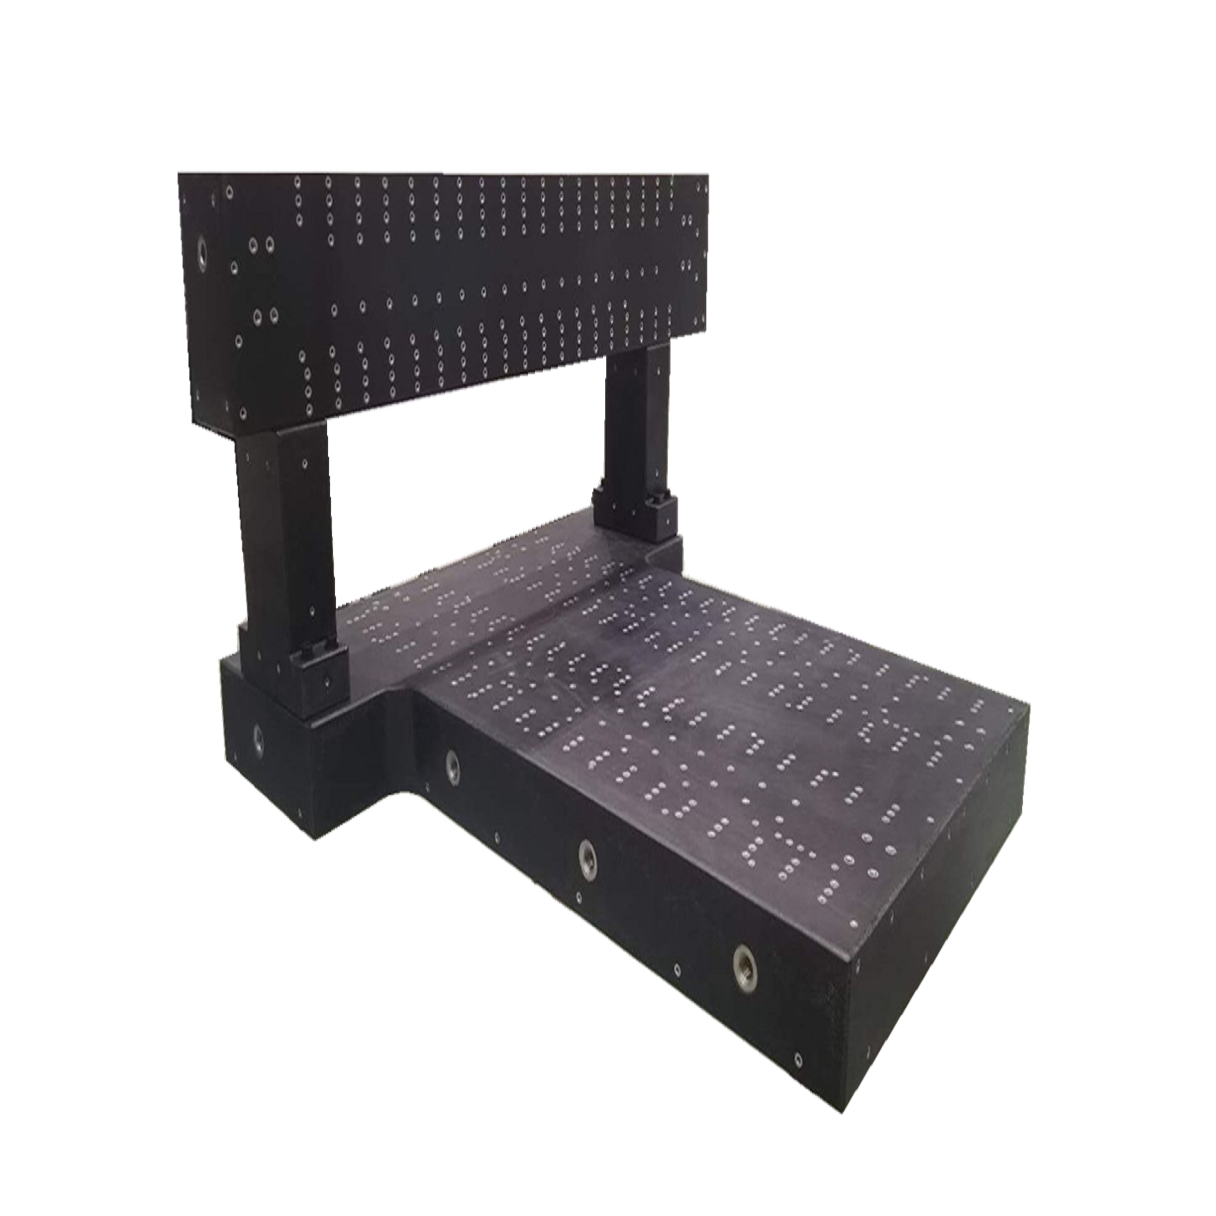 High Quality for Image Measuring Instrument Granite Table - CNC Granite Assembly – ZHONGHUI